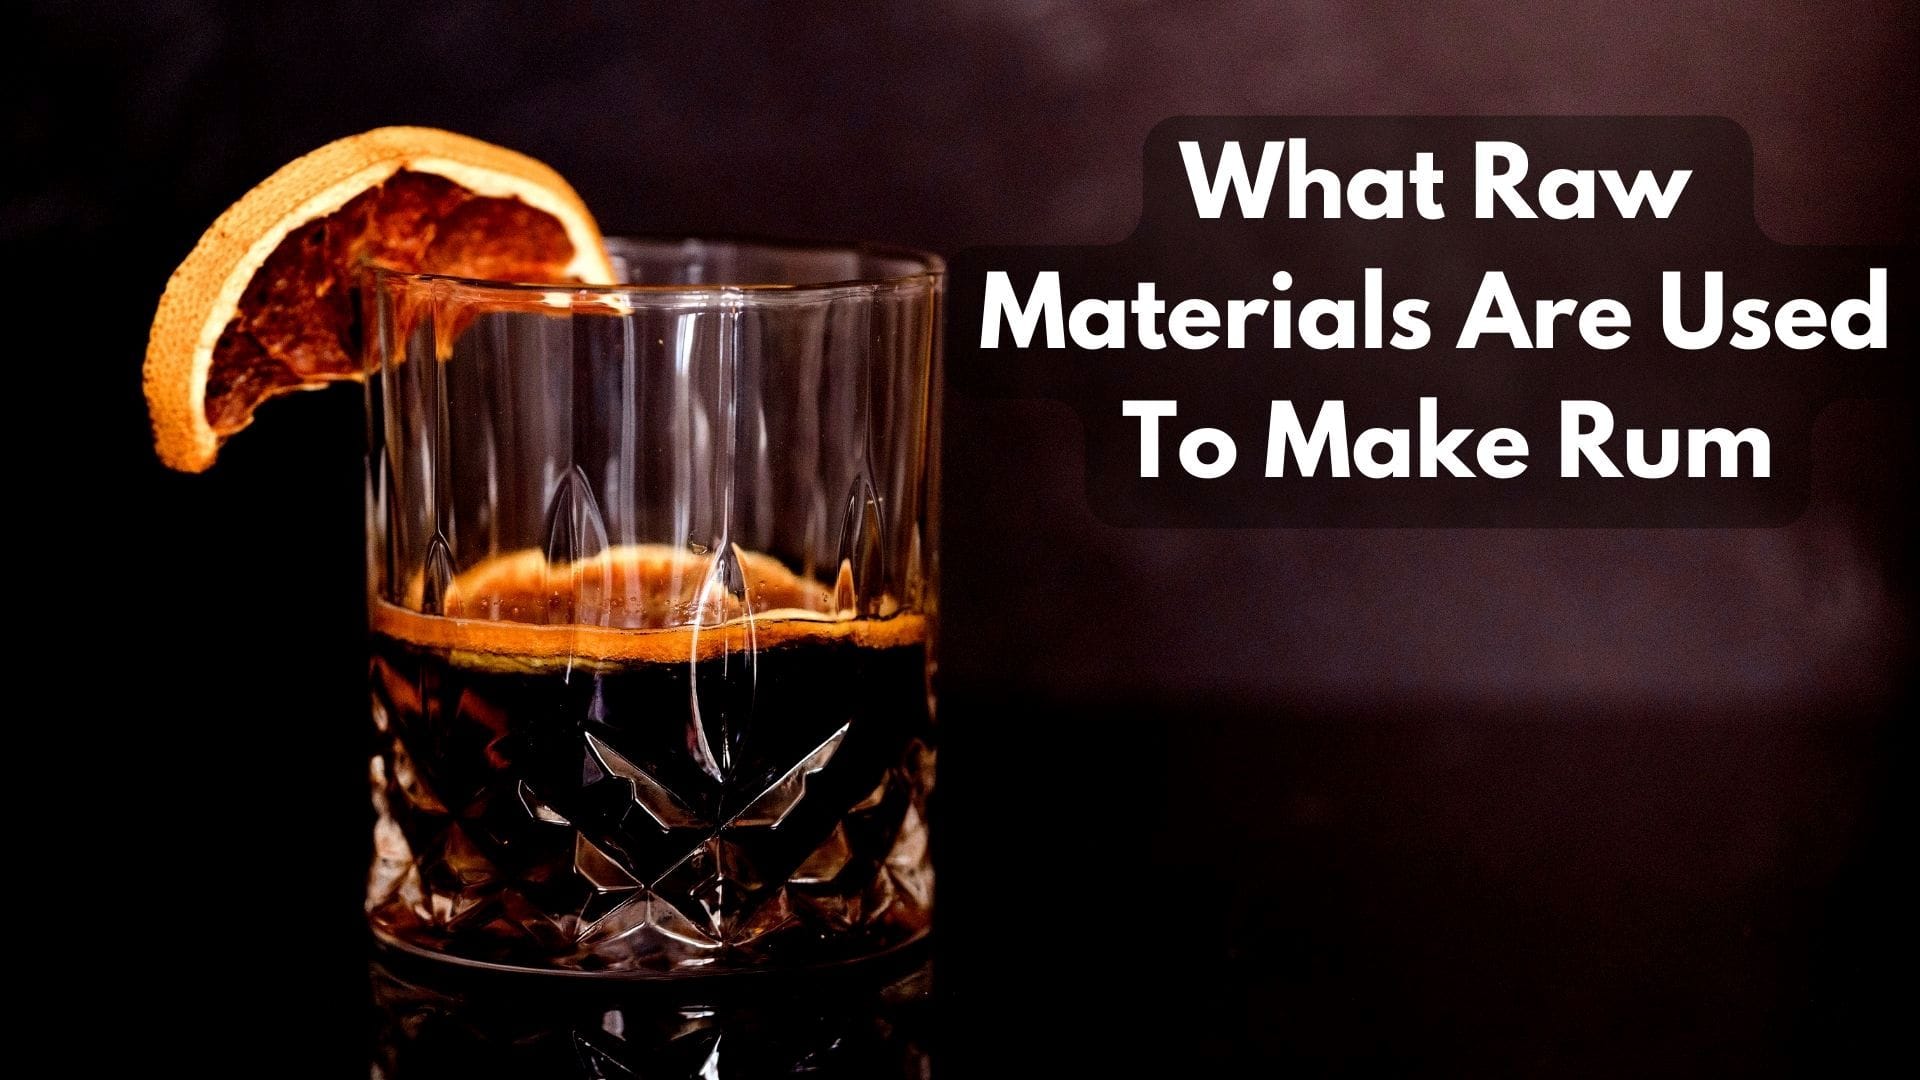 What Raw Materials Are Used To Make Rum